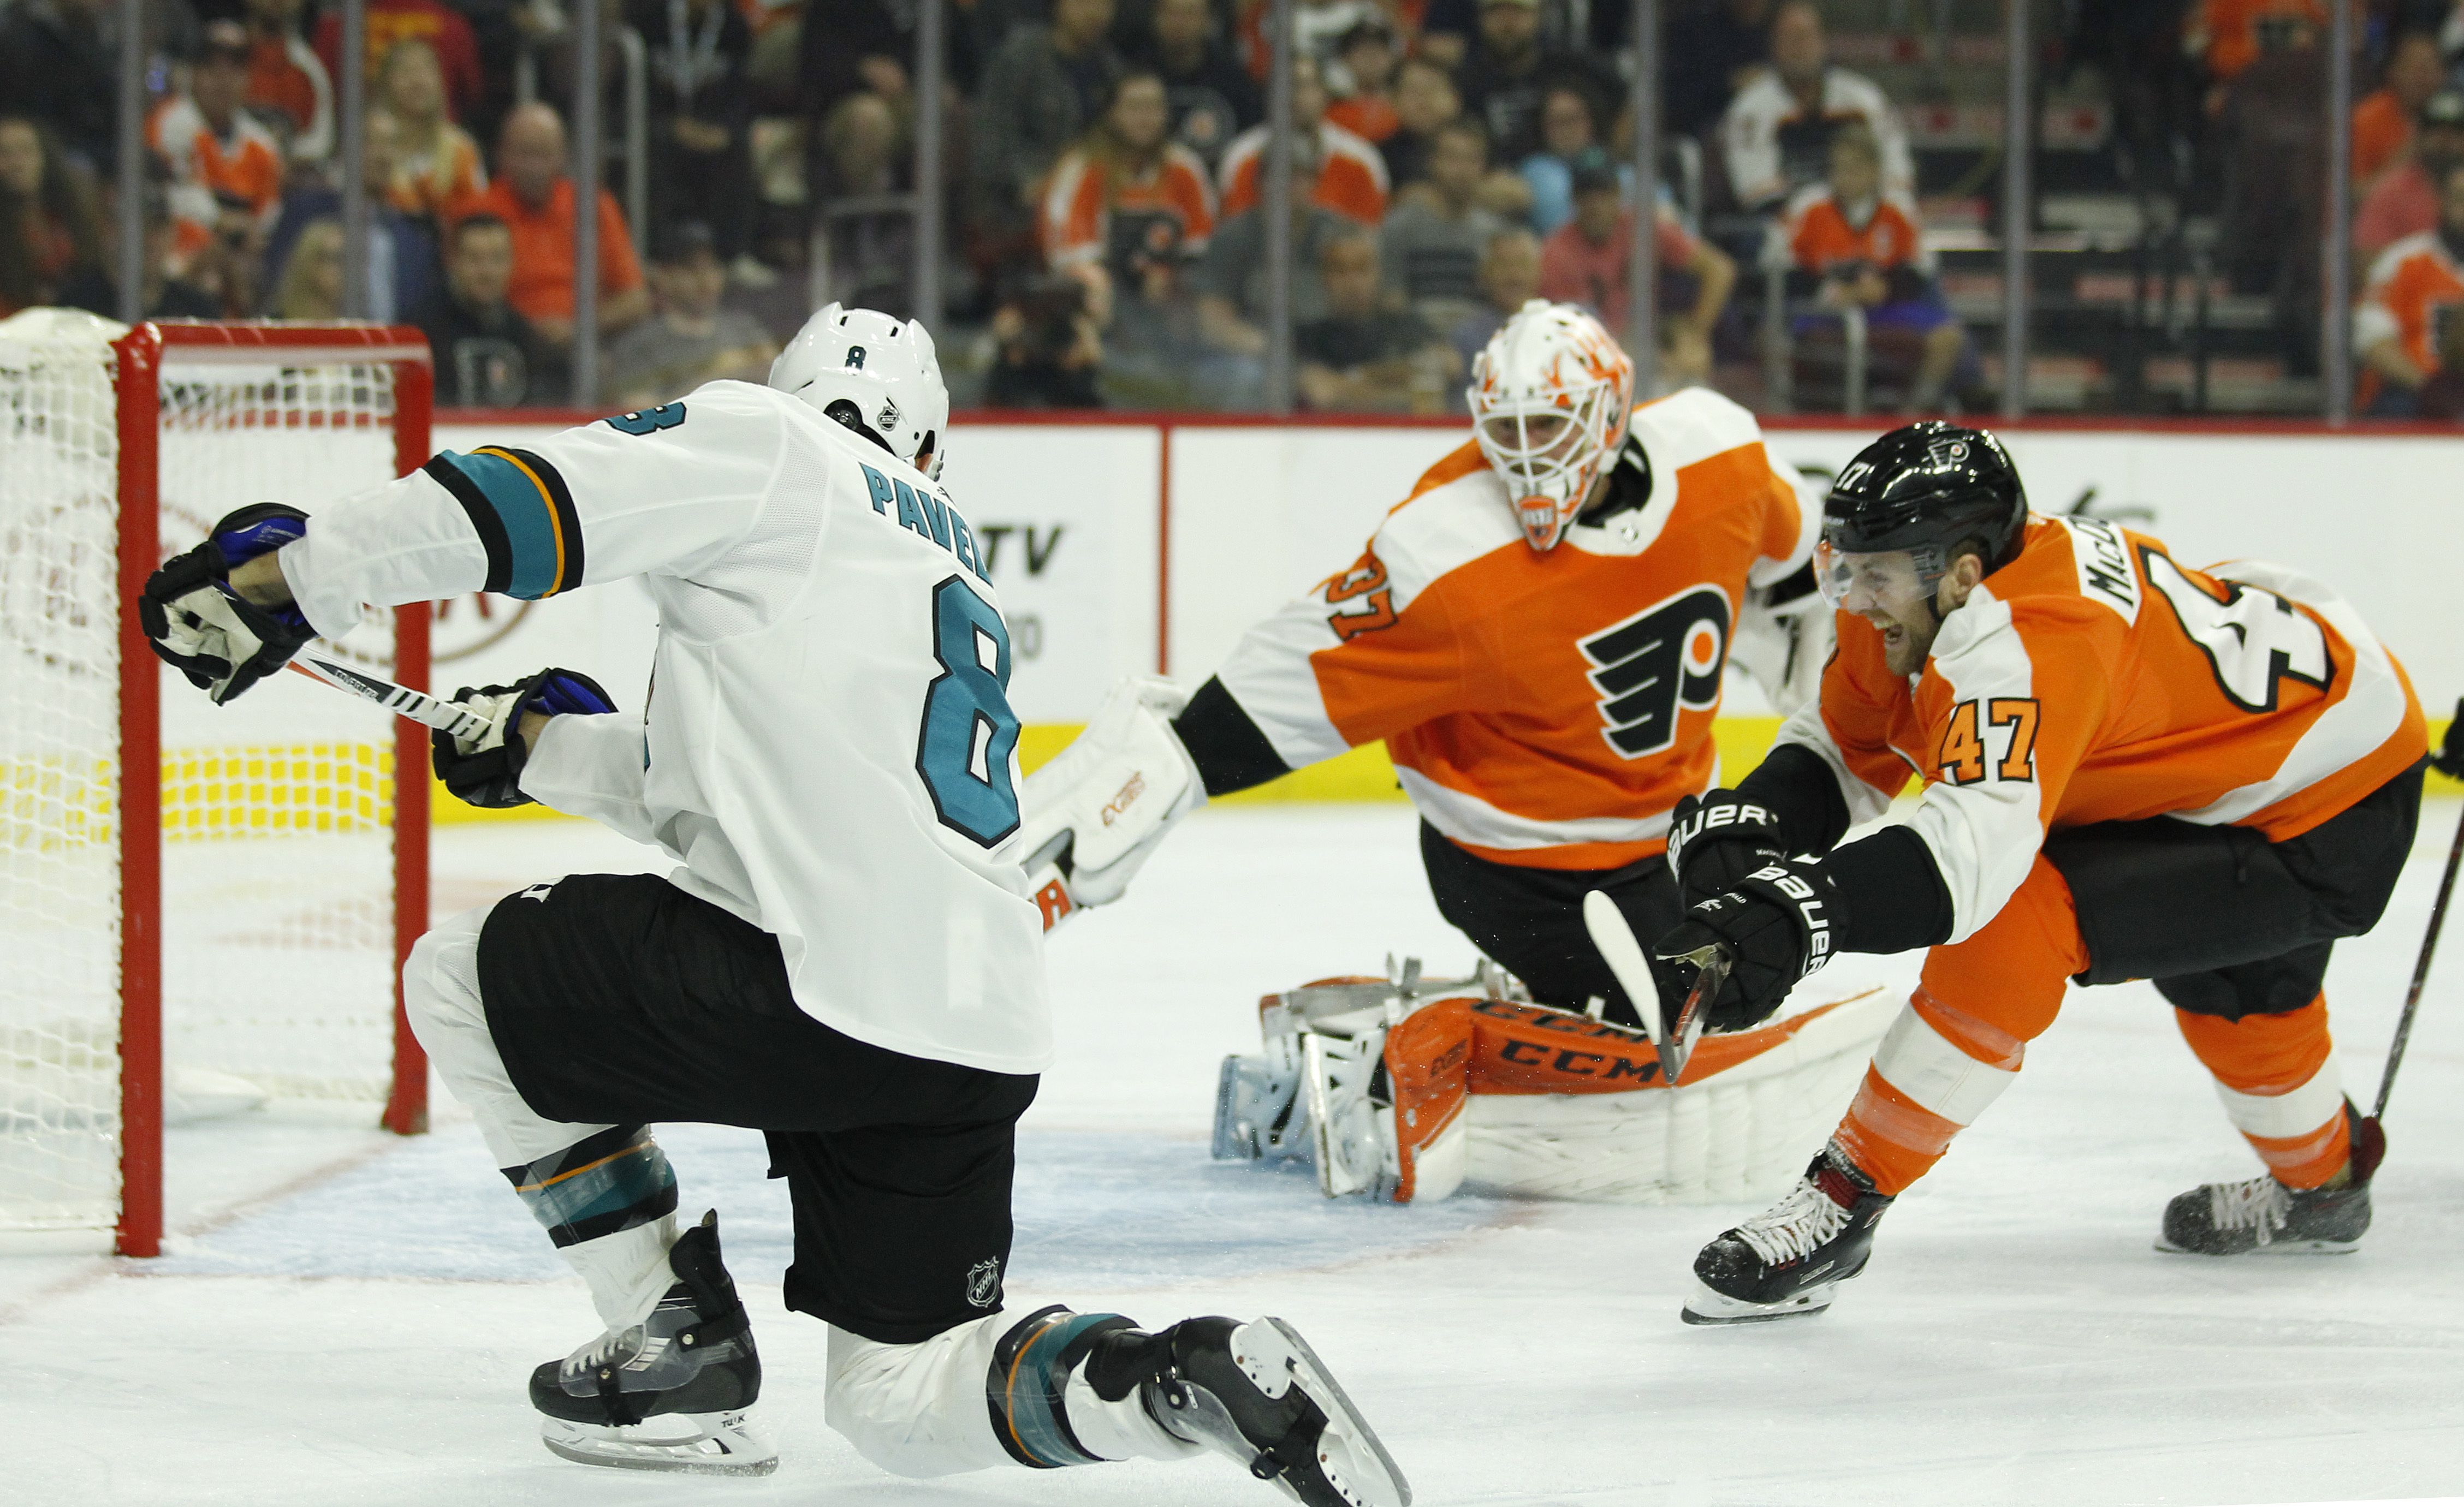 True grit: Sharks jump on Flyers early in 8-2 blowout